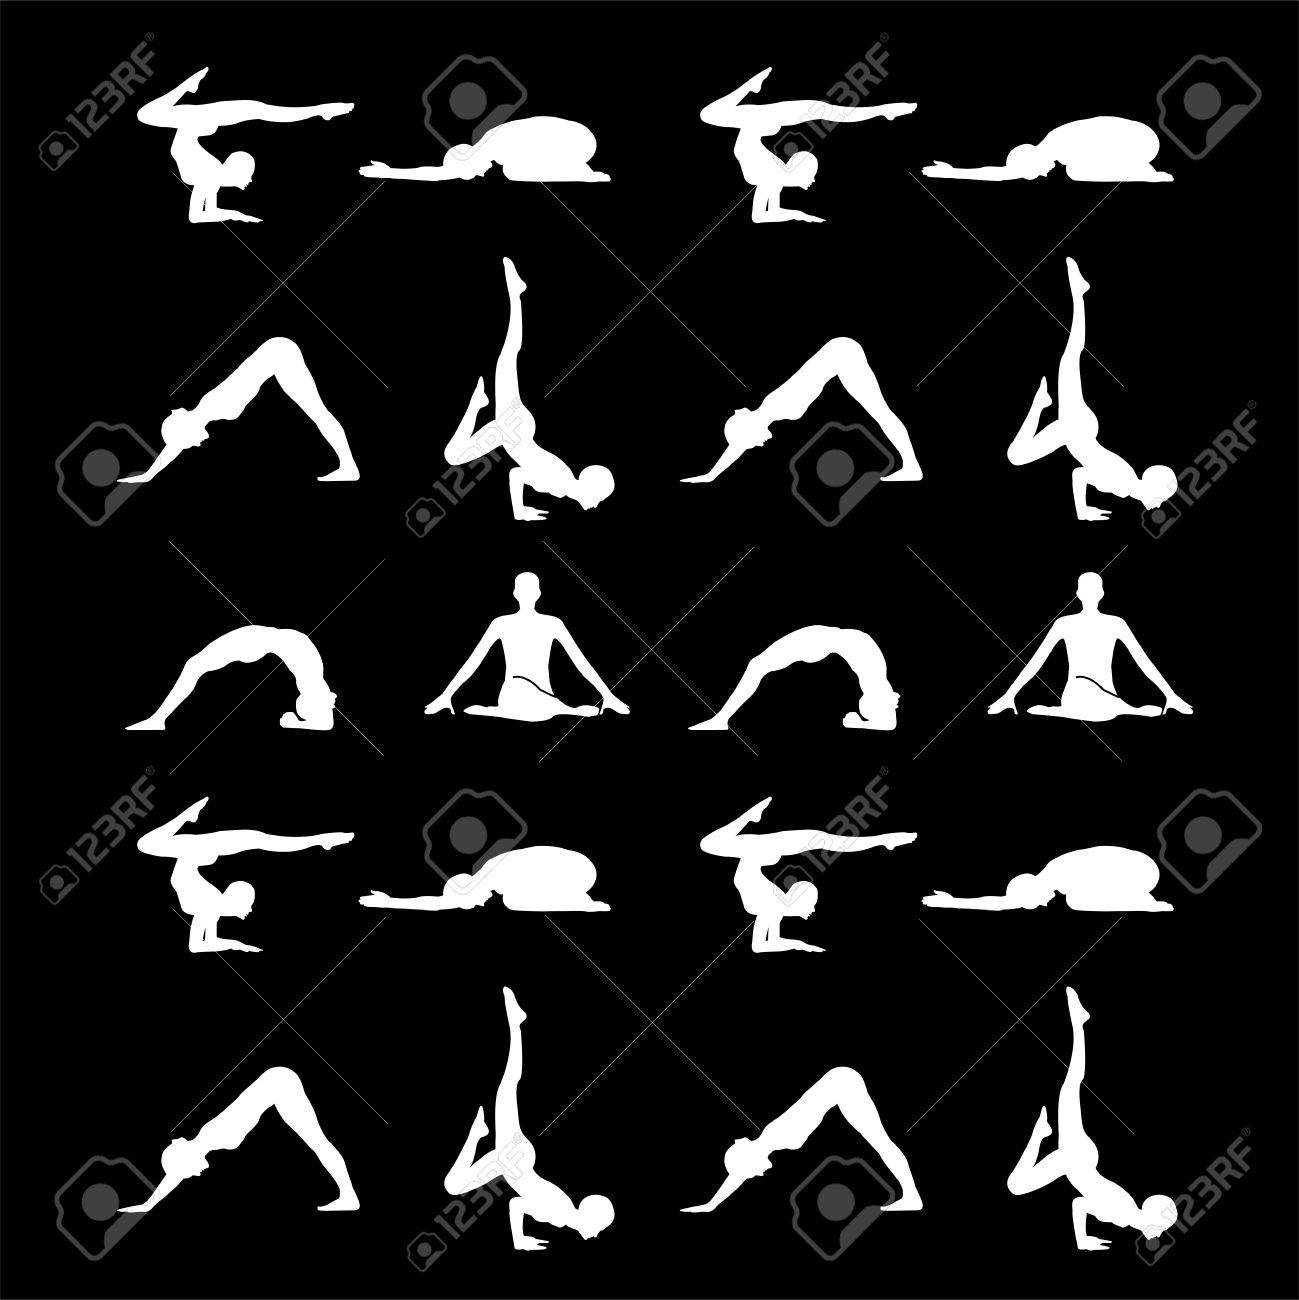 Yoga Poses Silhouette Wallpaper Royalty Free Cliparts Vectors